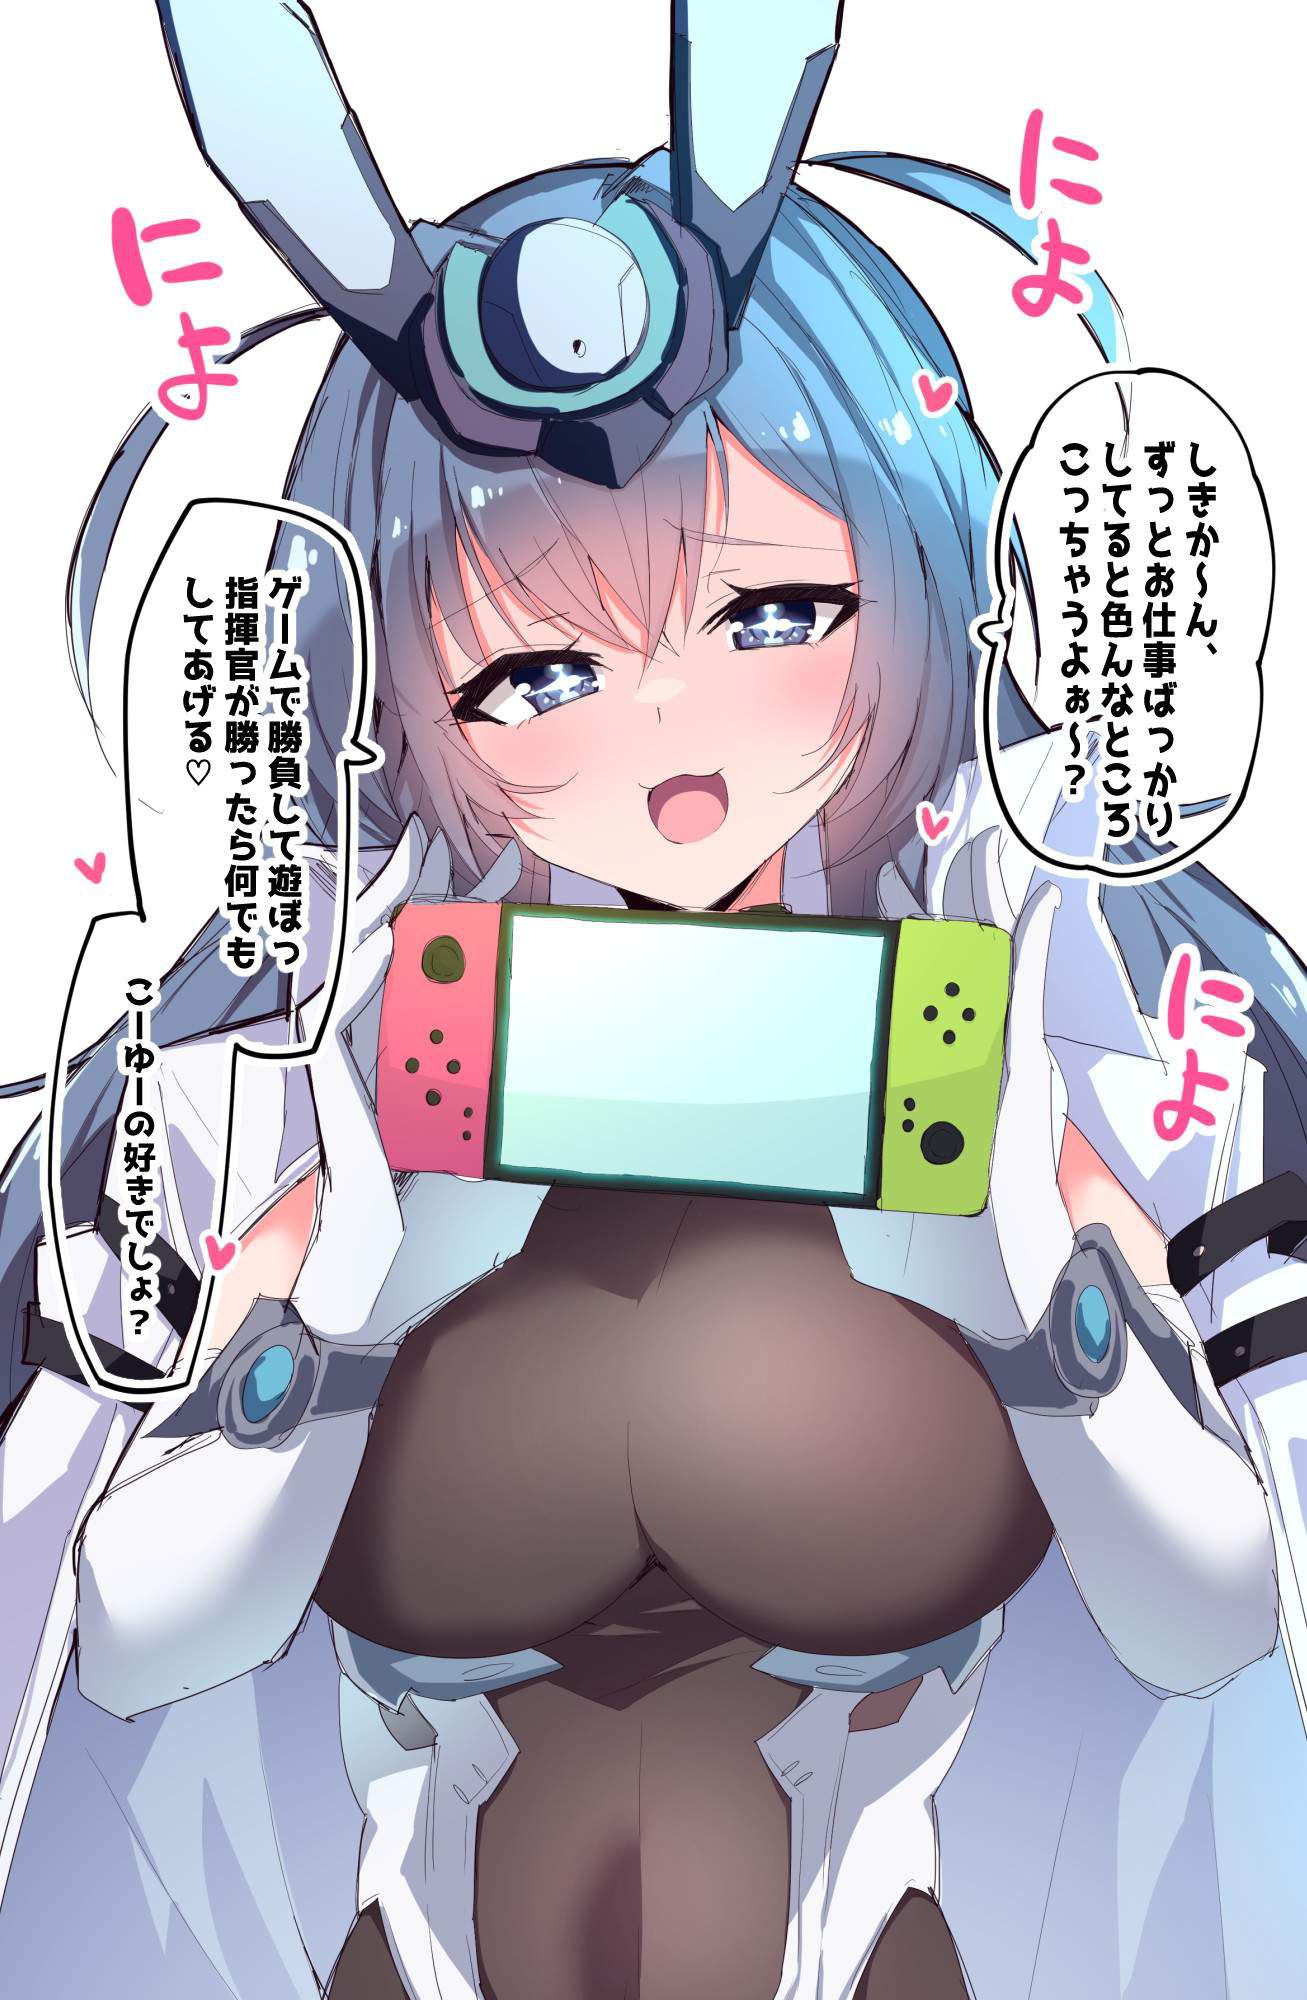 Please take an erotic image of Azur Lane coming out! 20